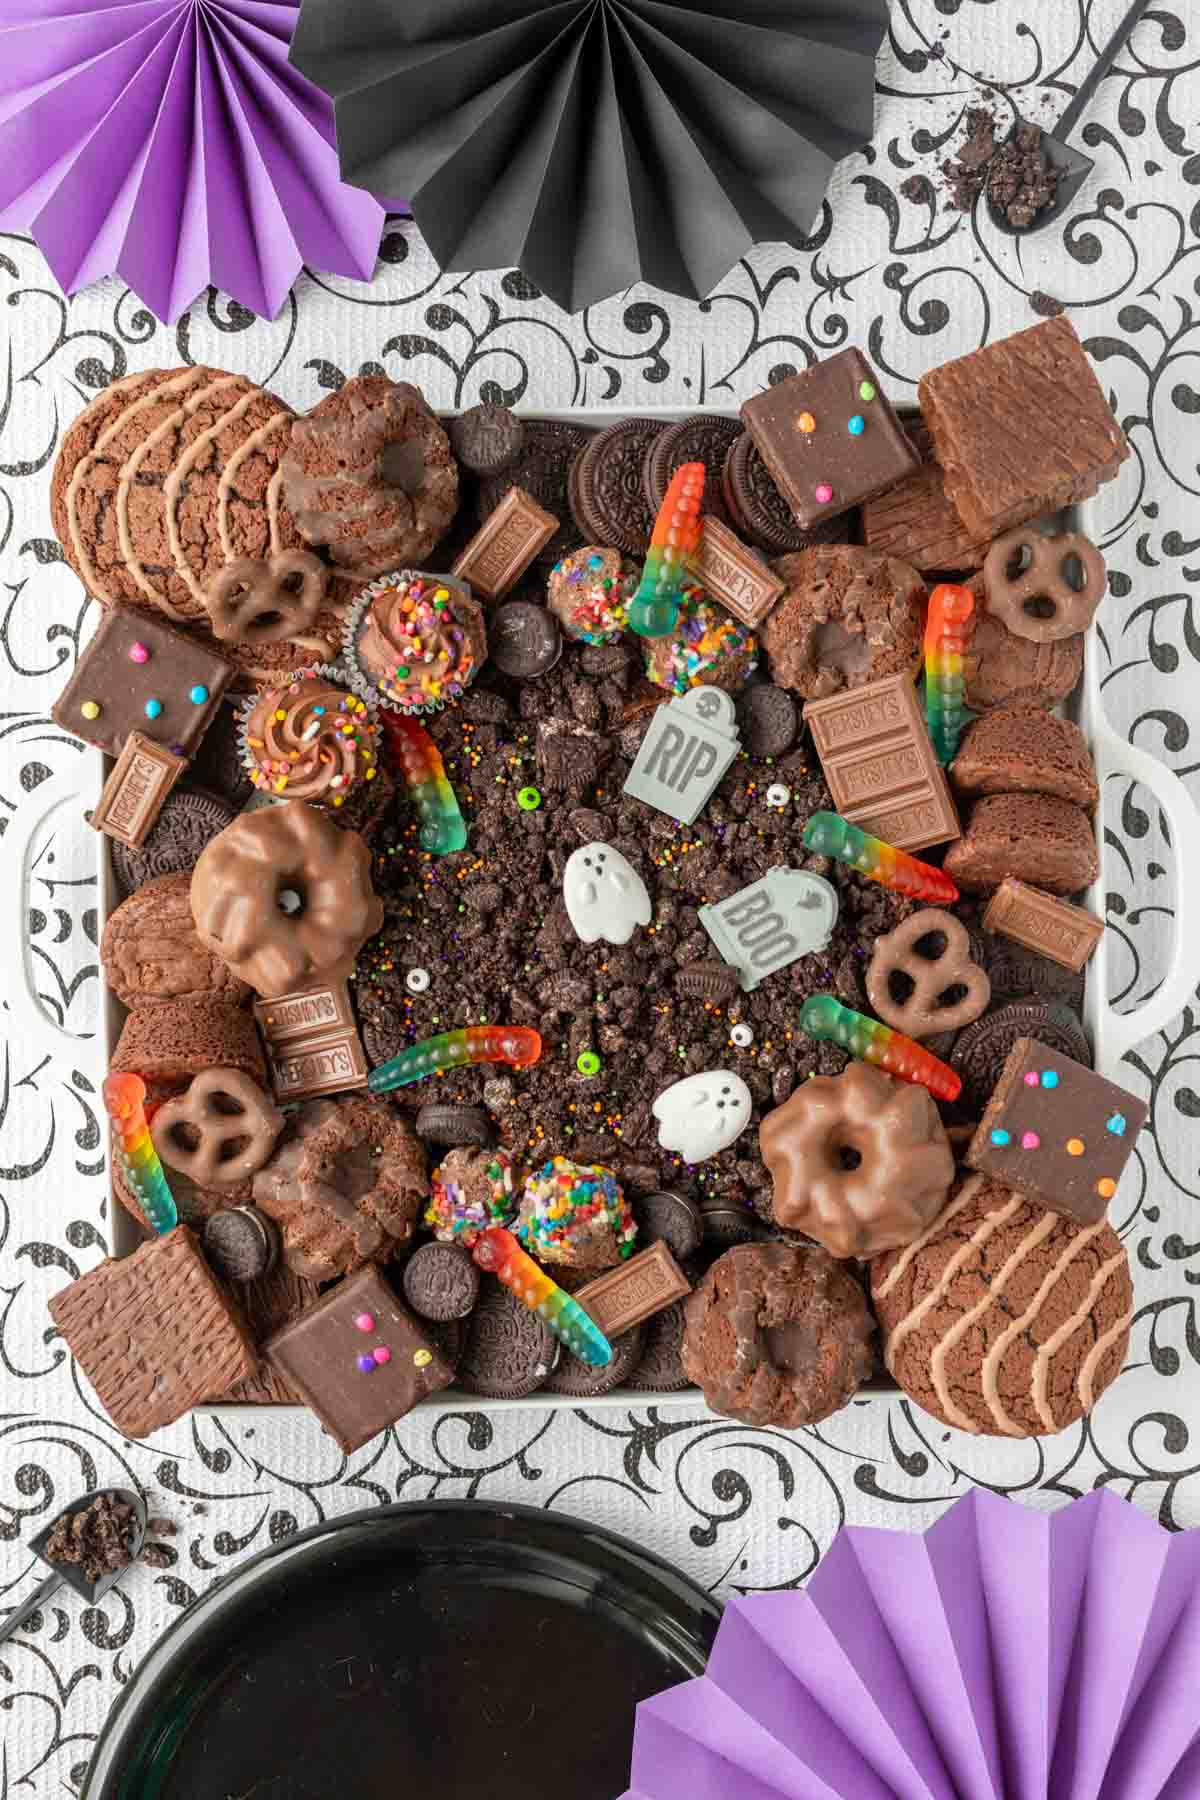 Halloween frosting board with dirt and worms